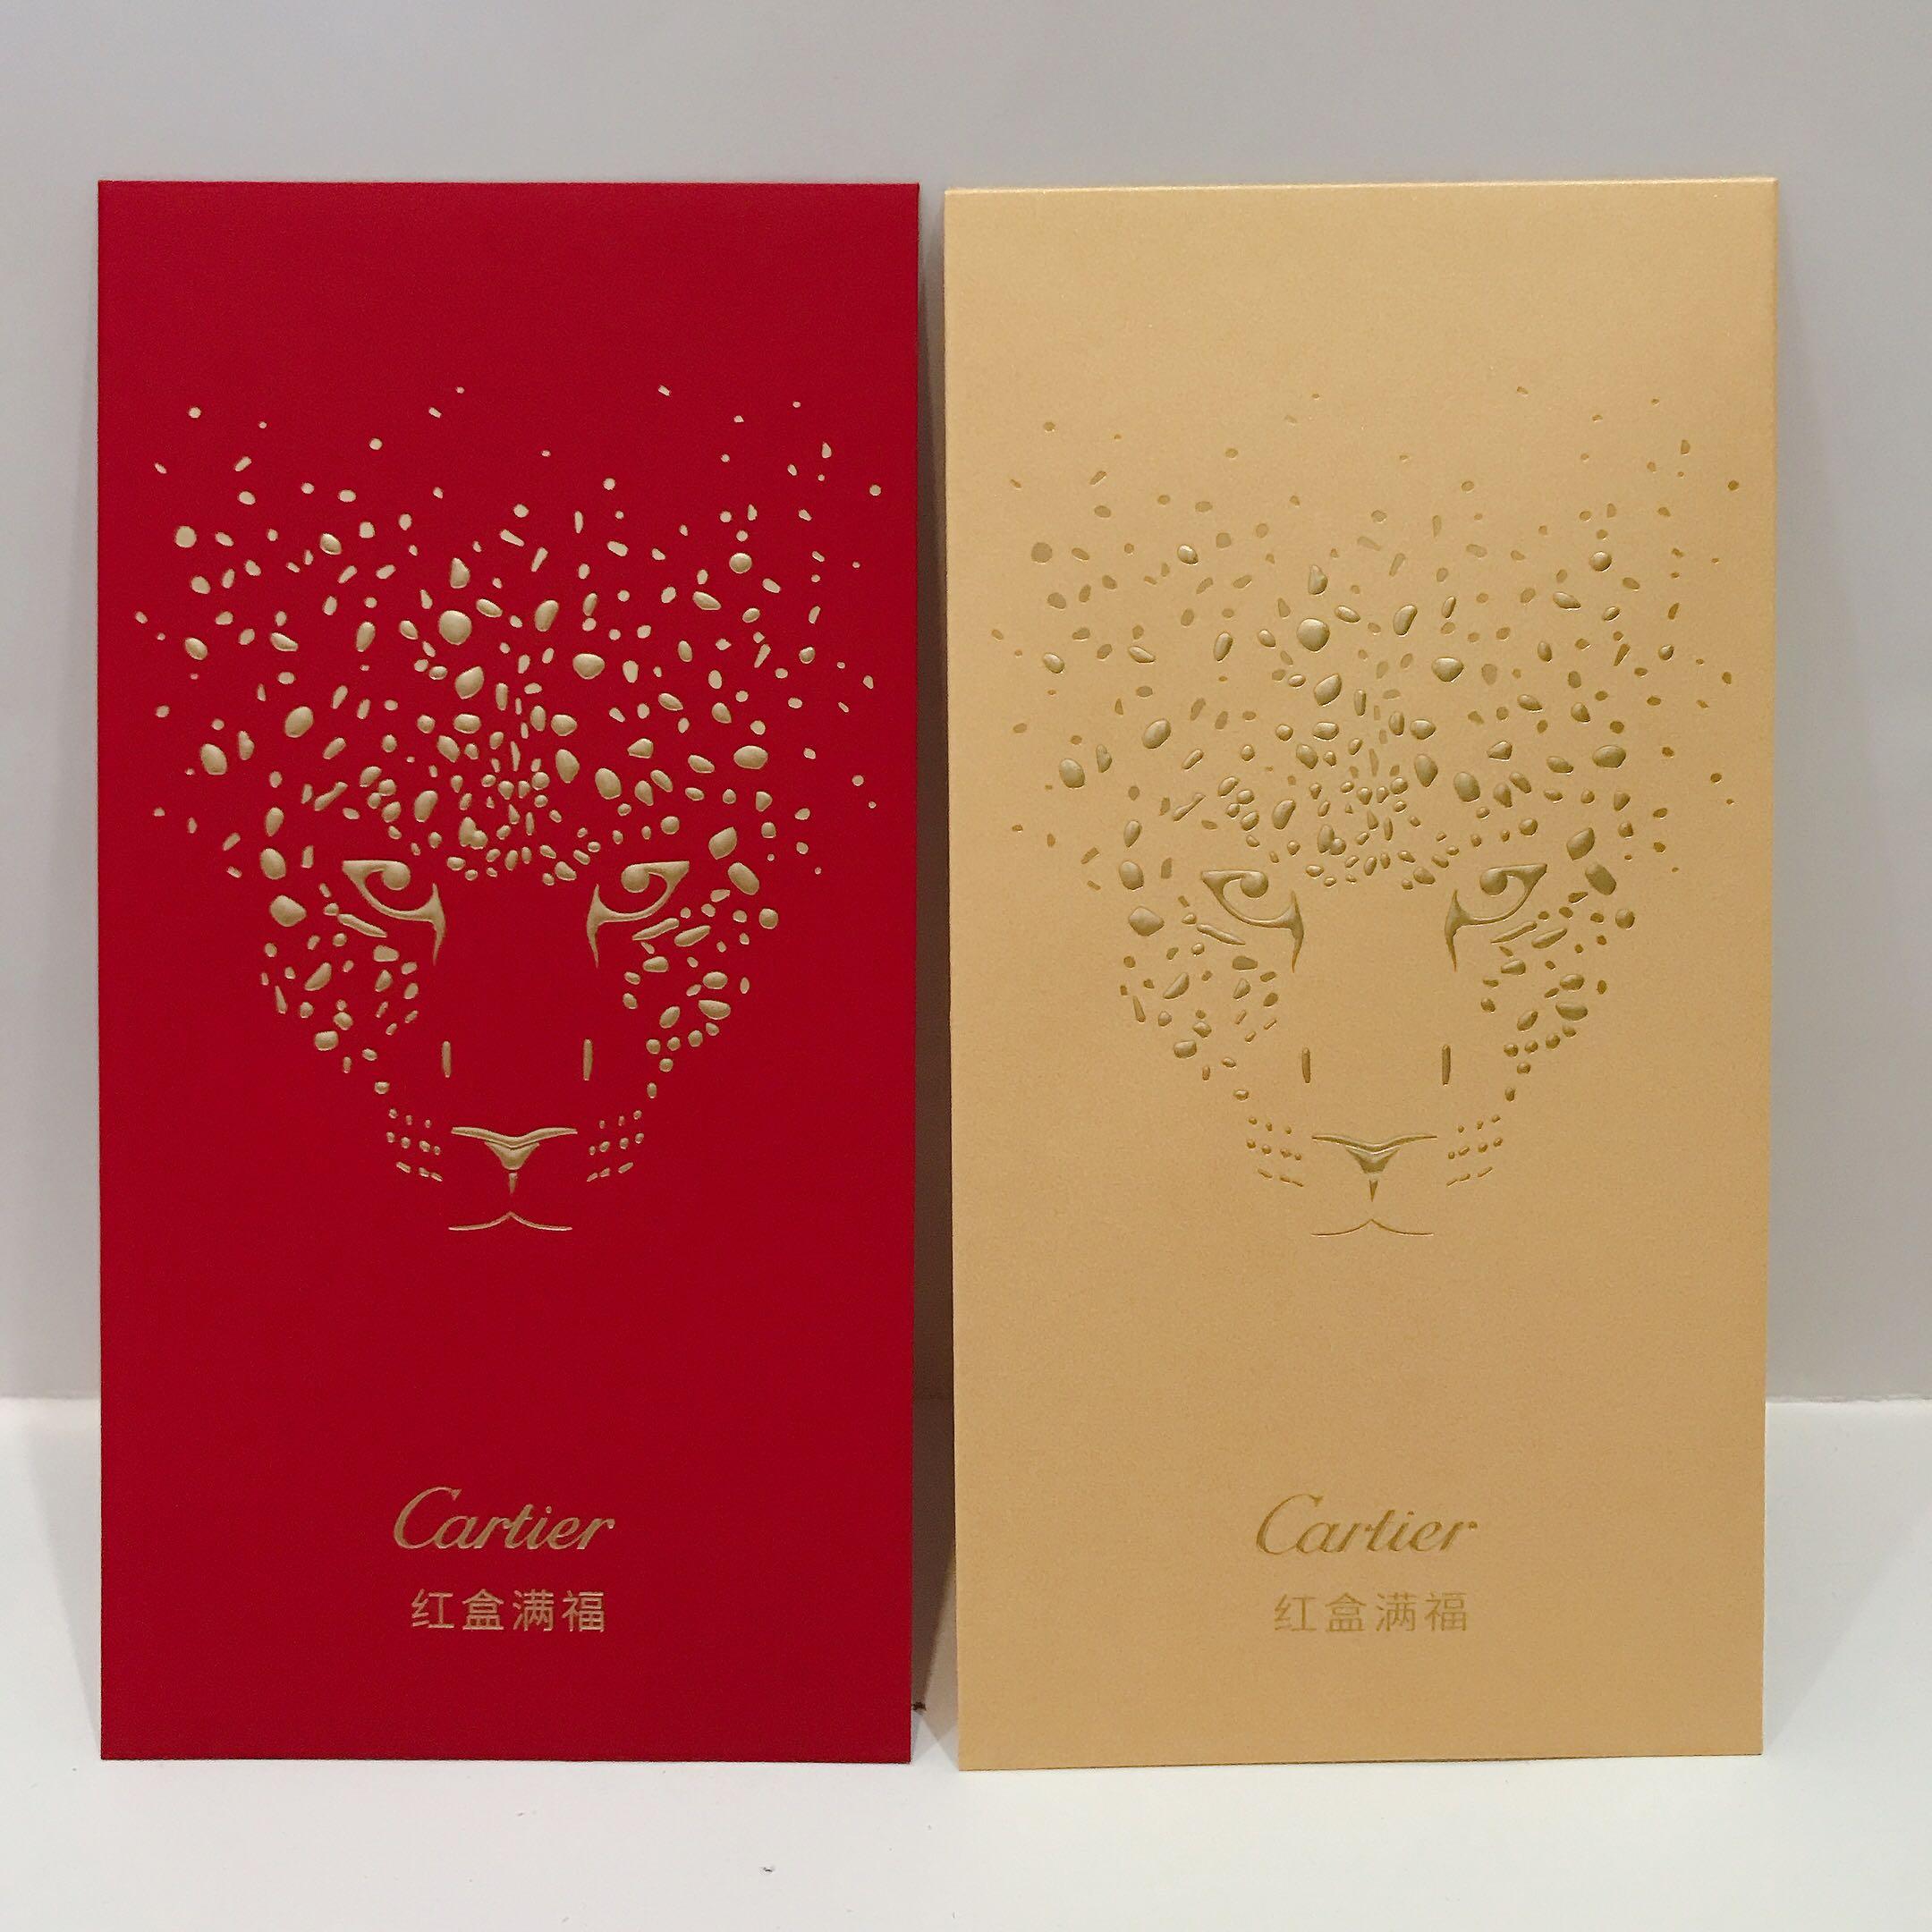 NEW CARTIER LUNAR Chinese New Year Red & Glod Packet Envelopes Tiger 2022  $88.88 - PicClick